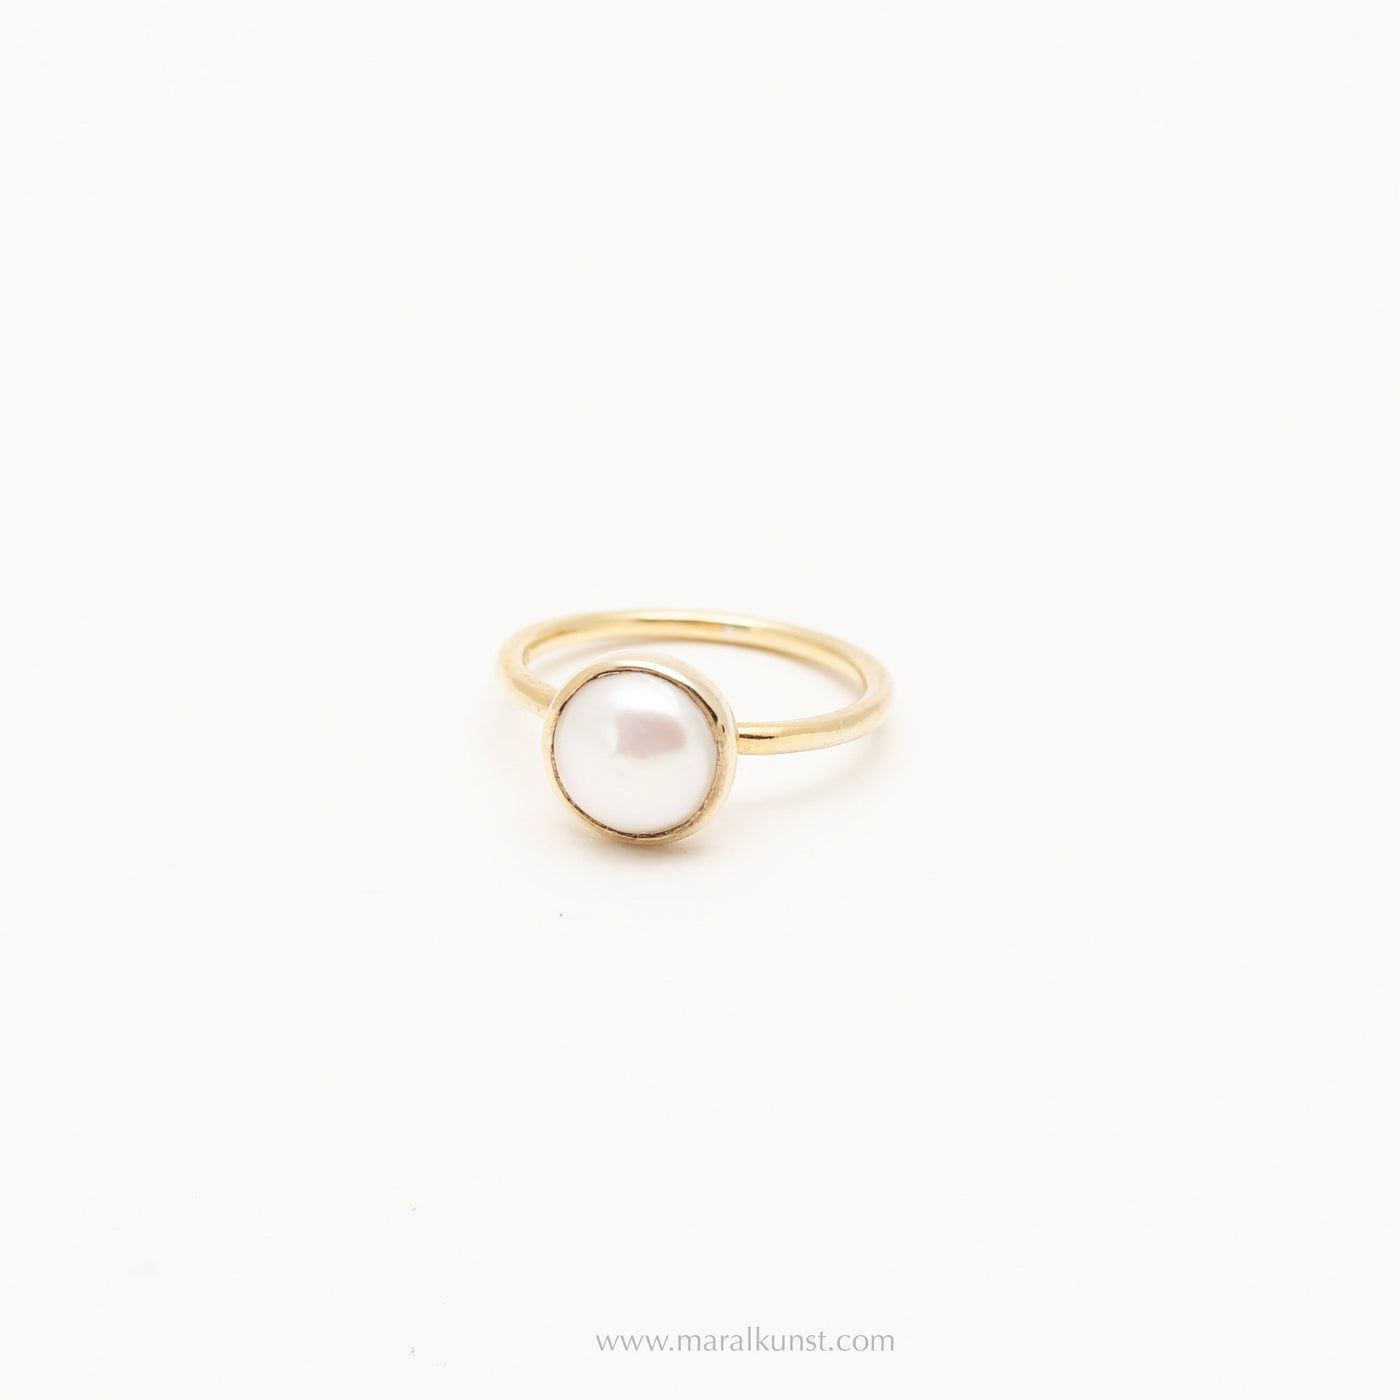 Freshwater Pearl Ring in Gold - Maral Kunst Jewelry